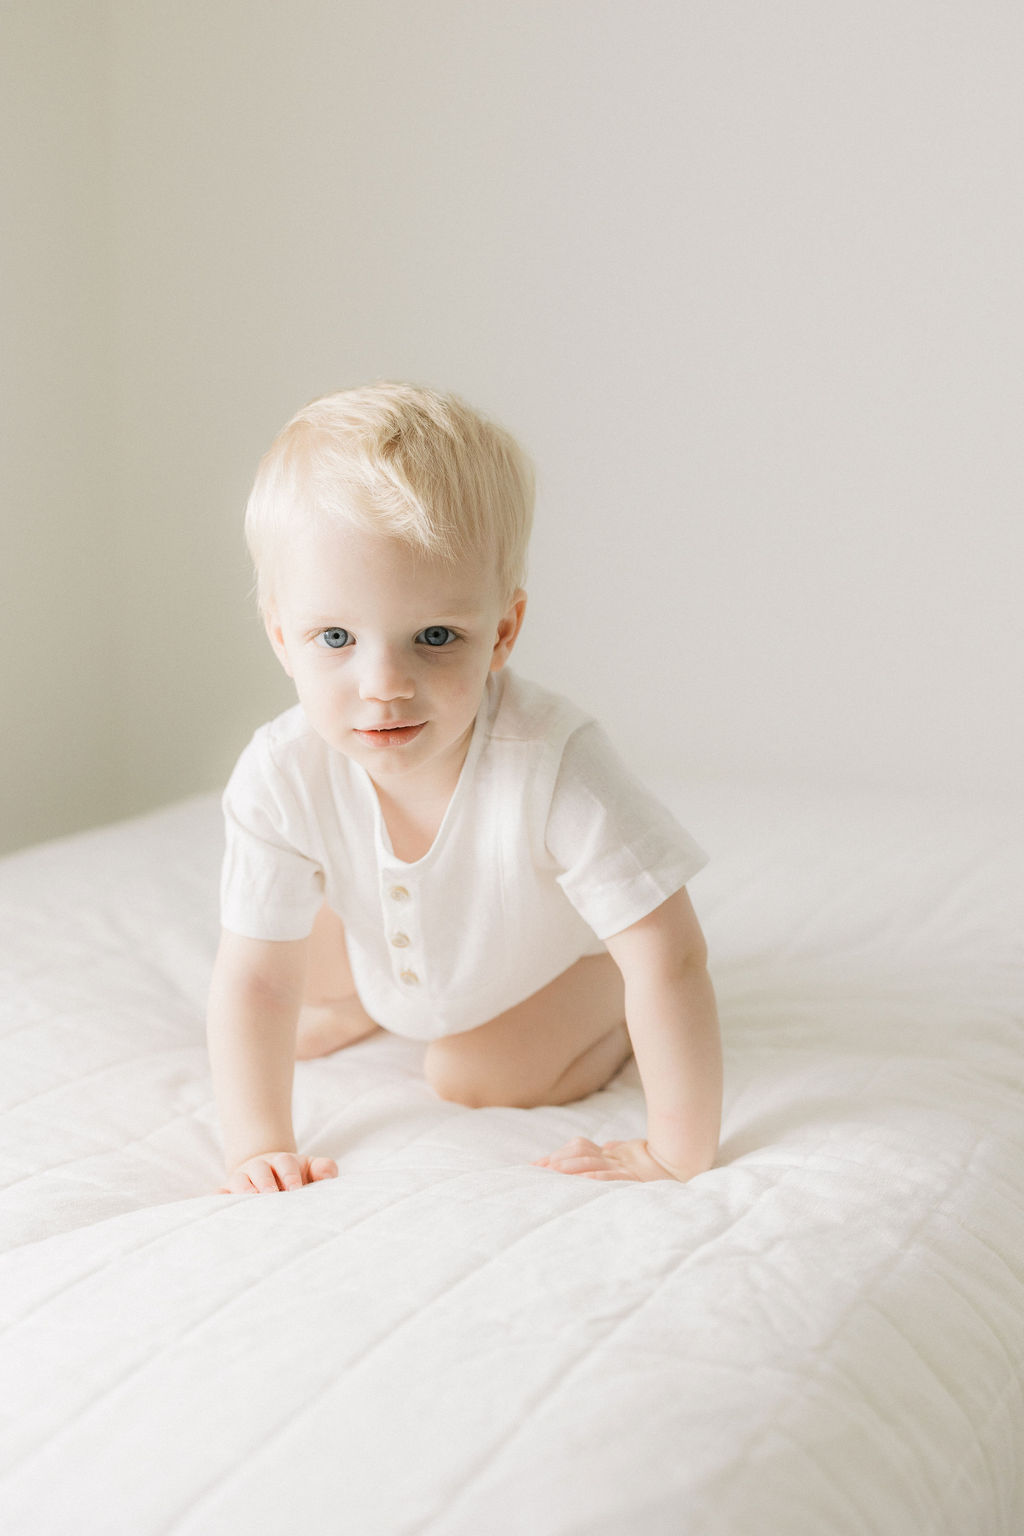 A young boy in a white onesie crawls across a white bed in a studio